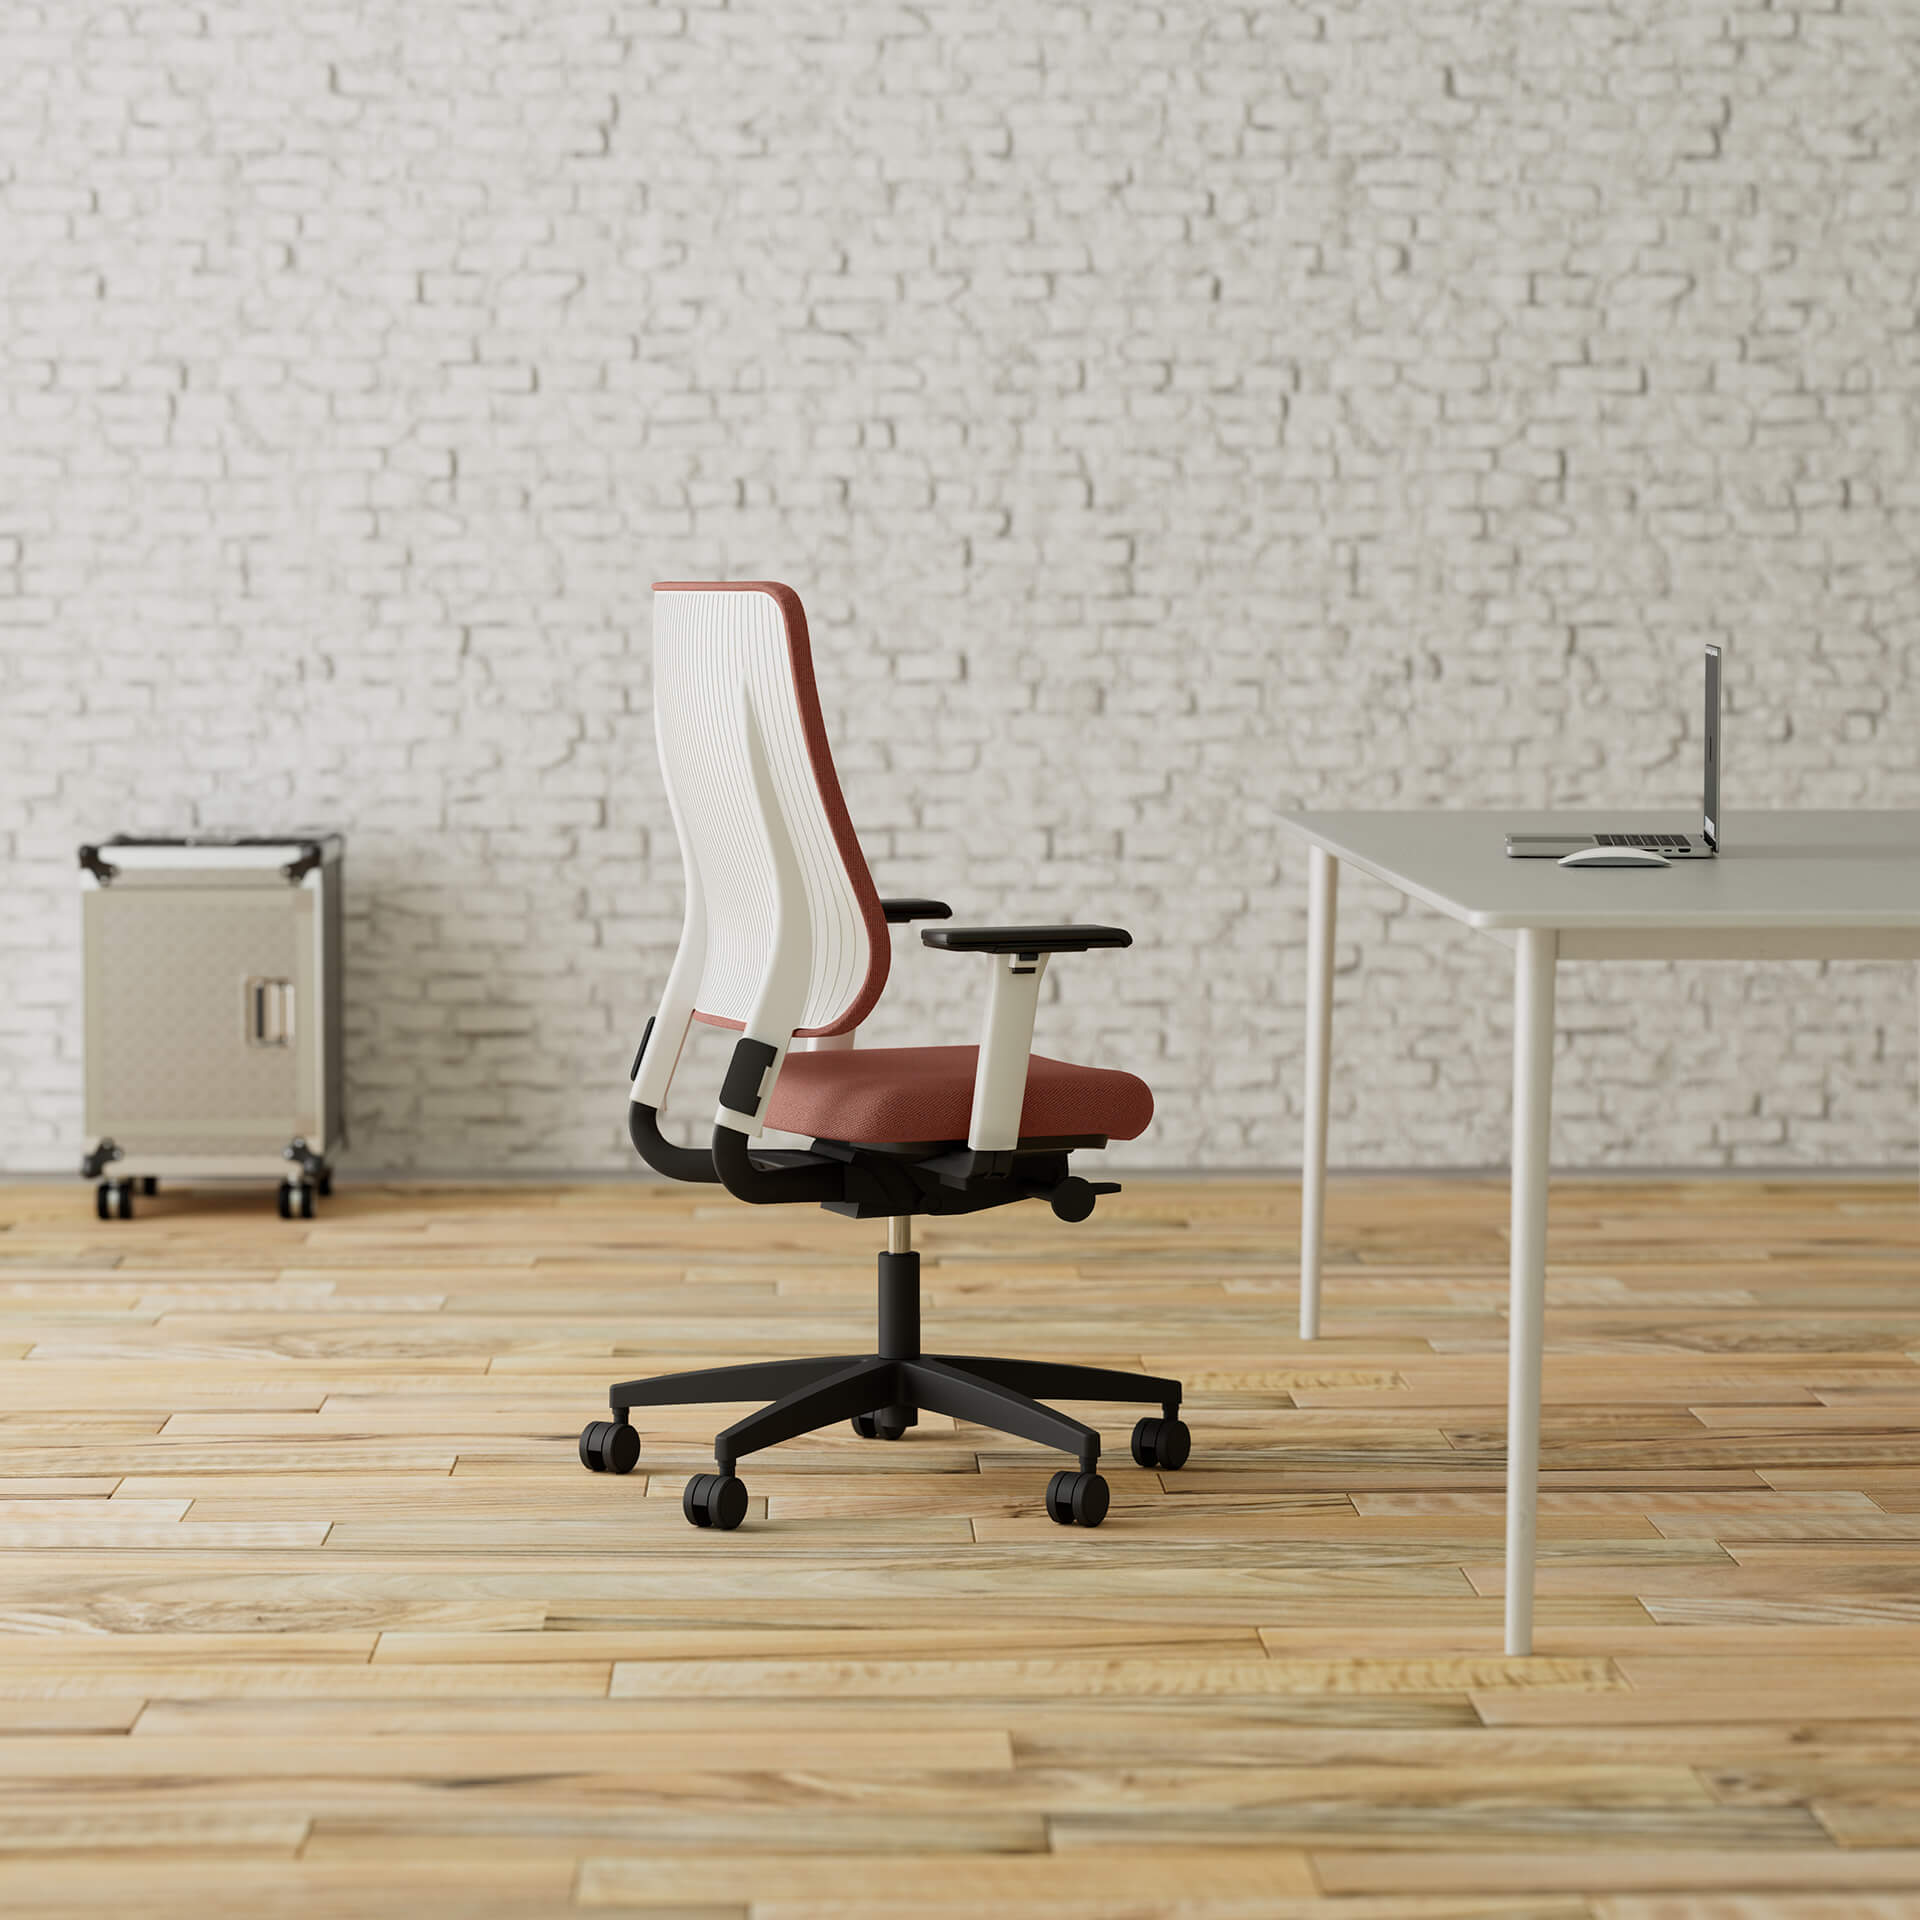 Red Office Chair 3D Image